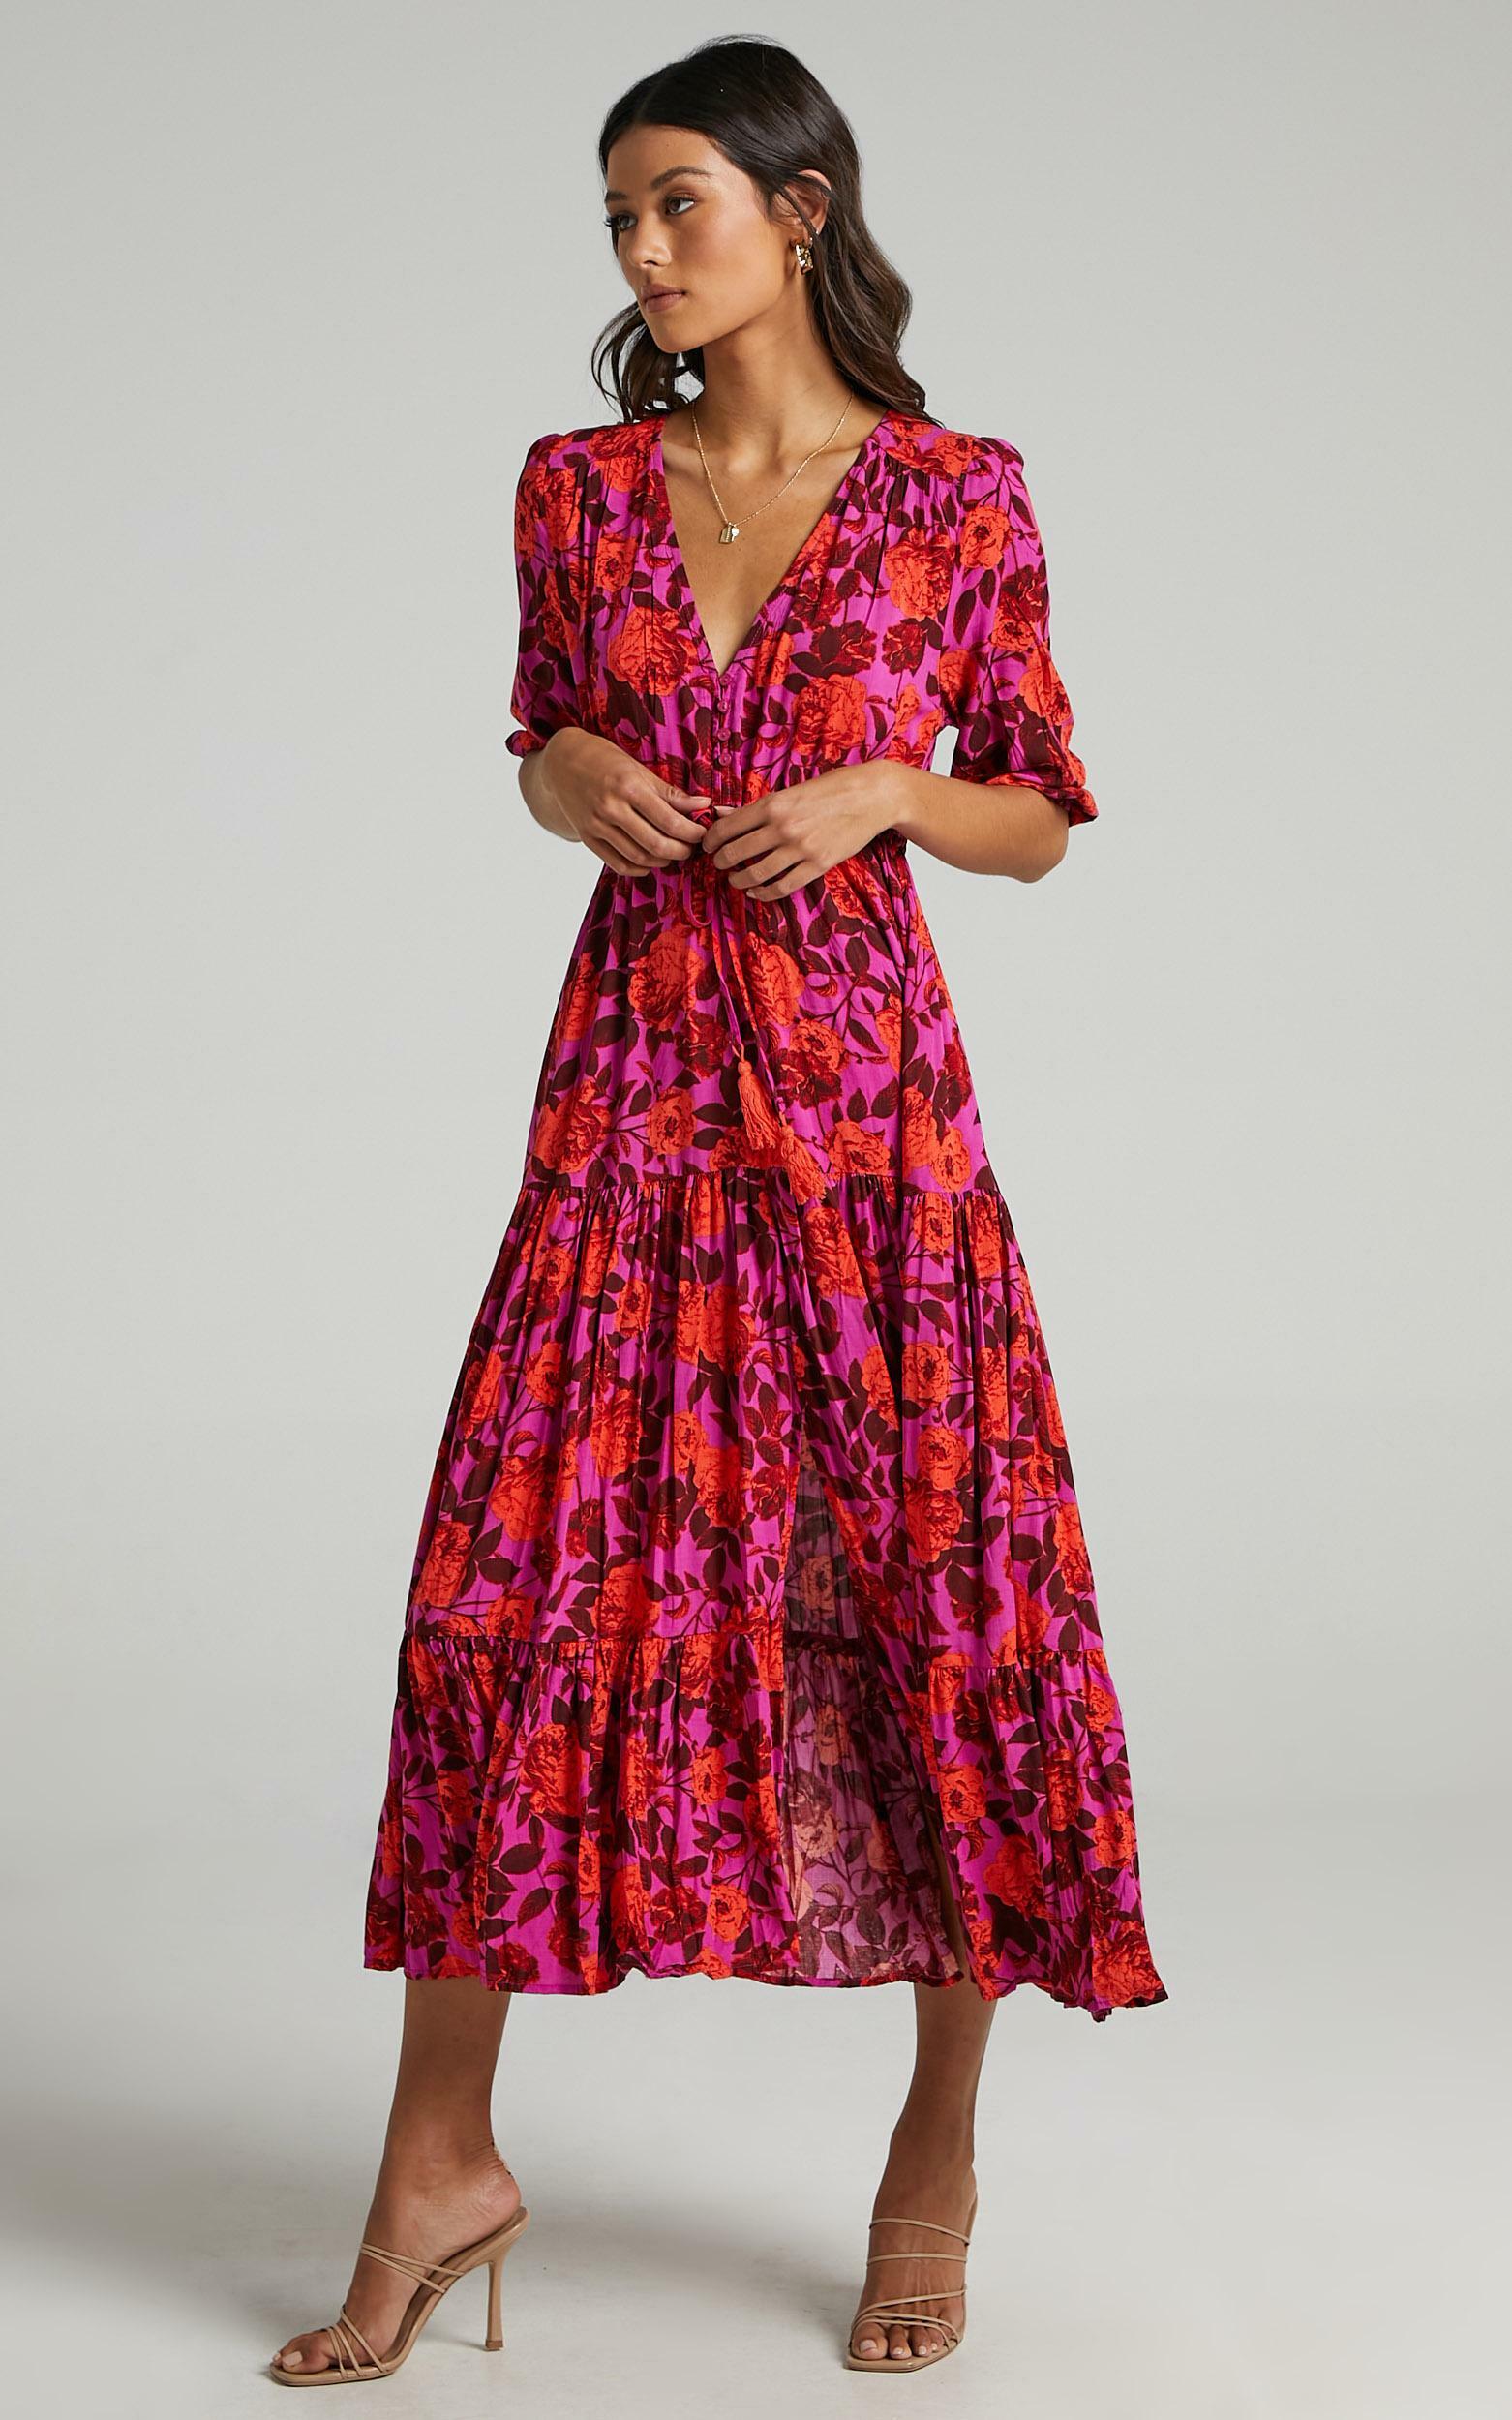 Waiting So Long Dress in Pink Floral | Showpo